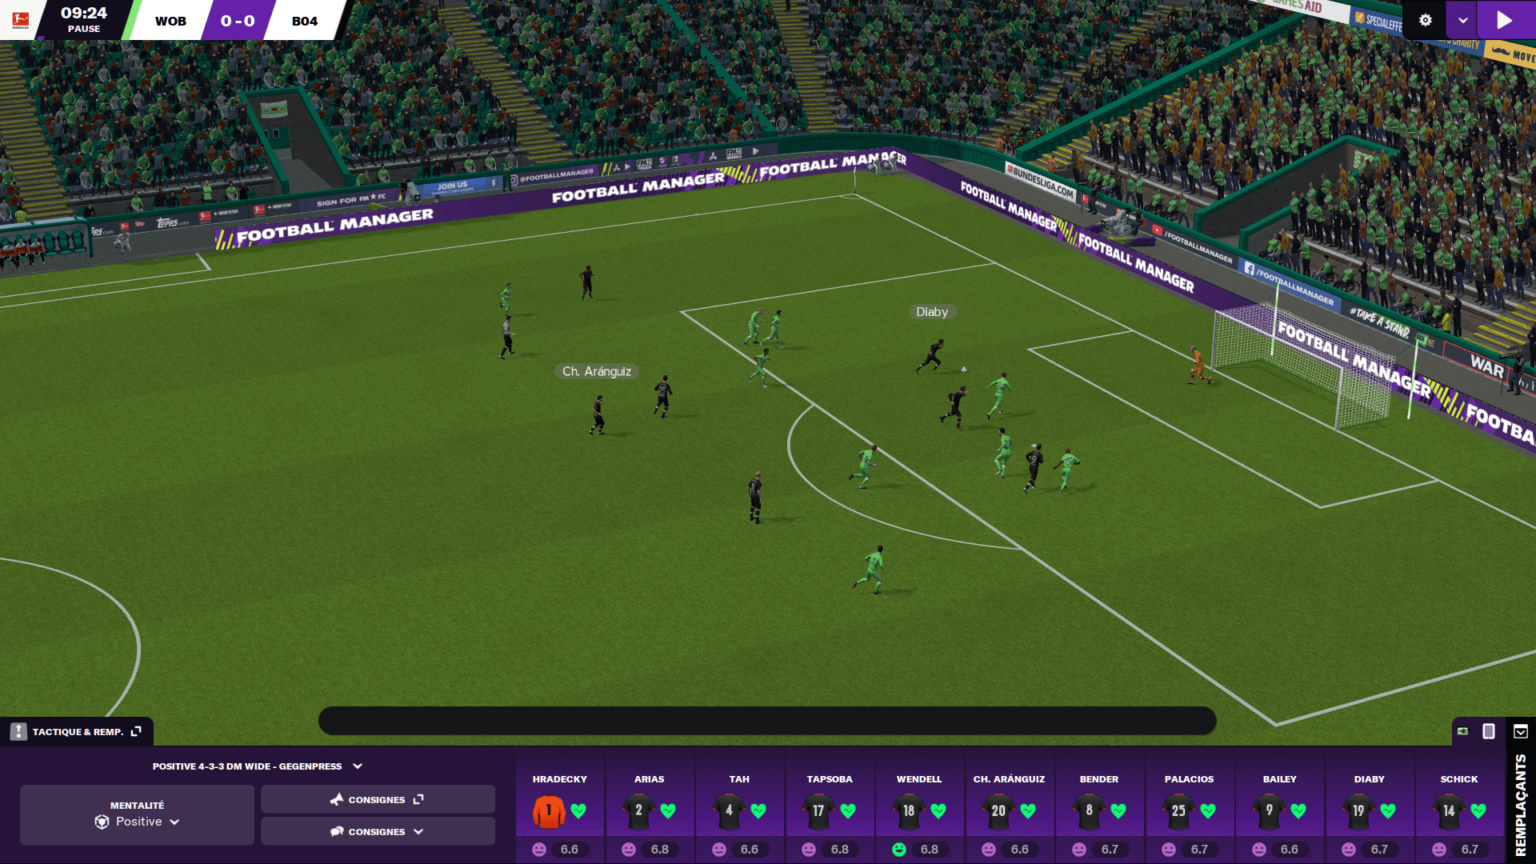 football manager 2021 xbox stuck on privacy policy